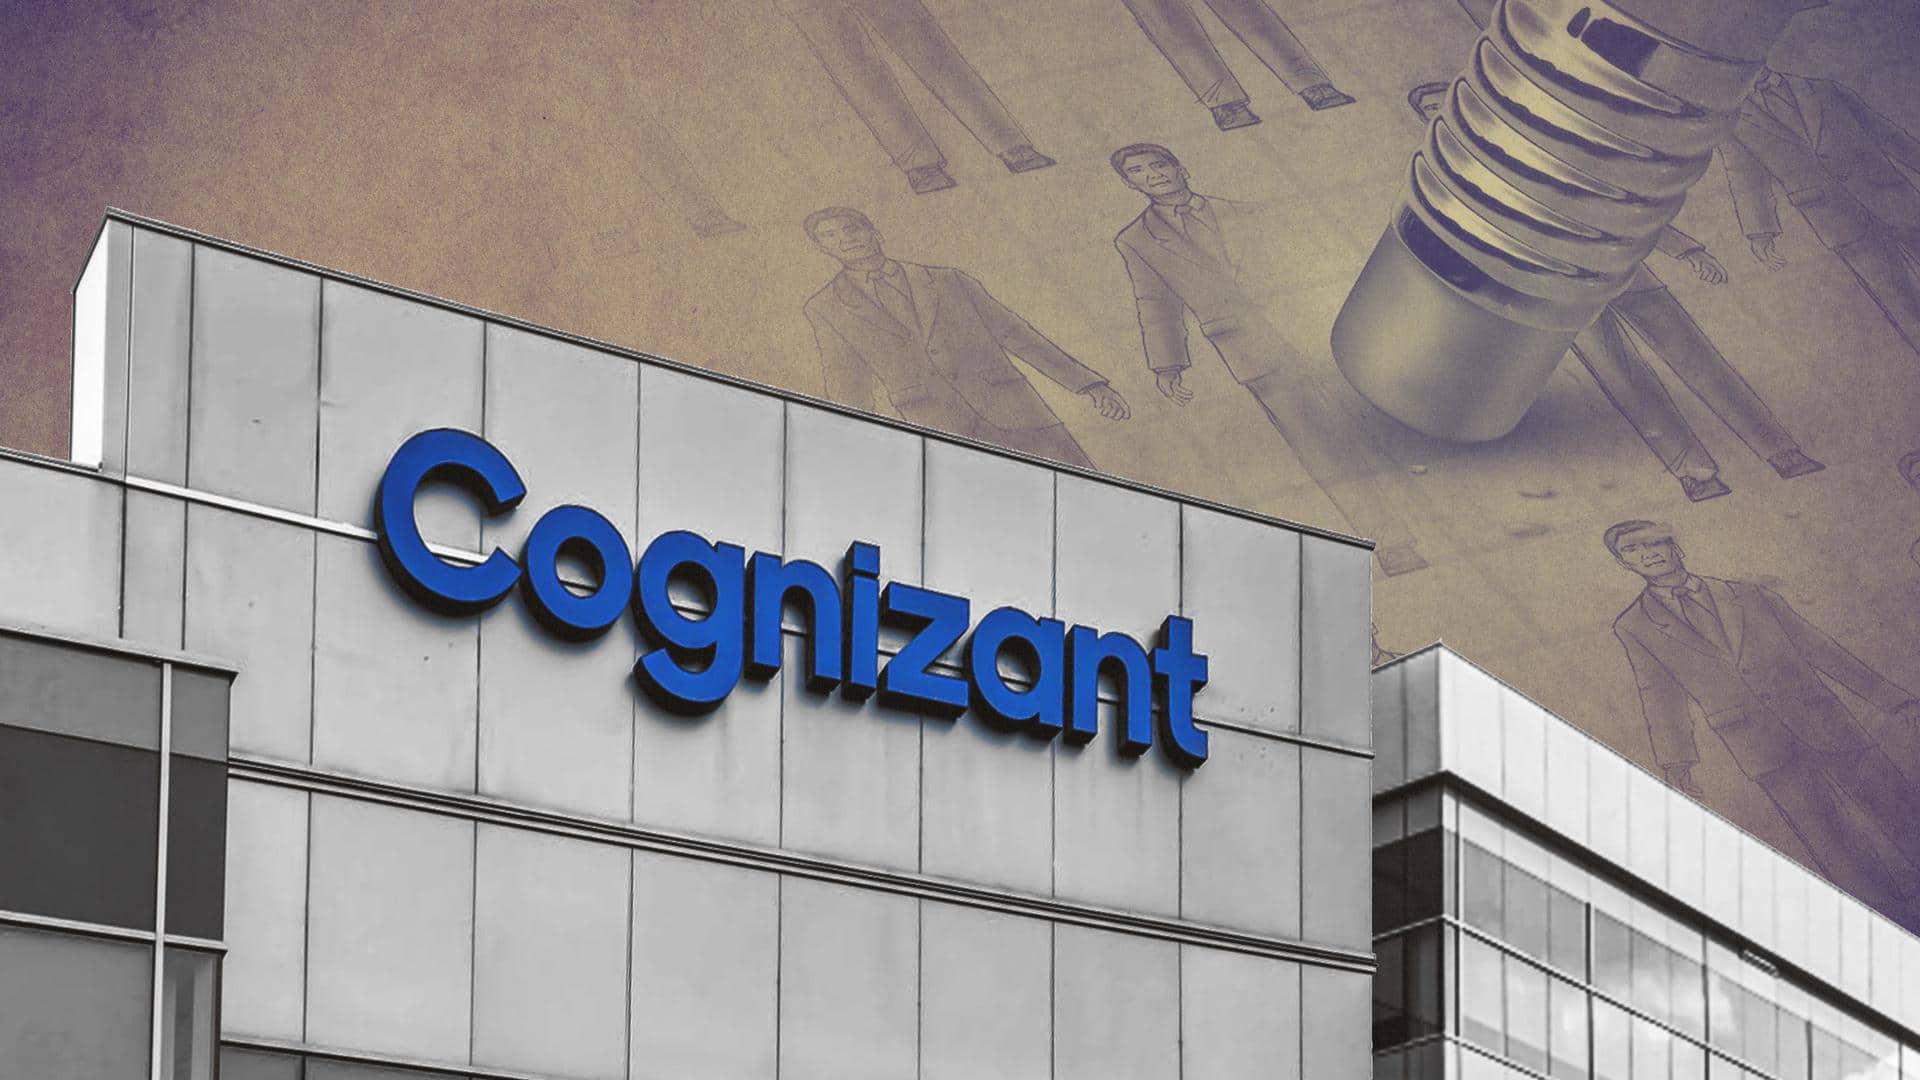 IT giant Cognizant to fire 3,500 employees over 2 years